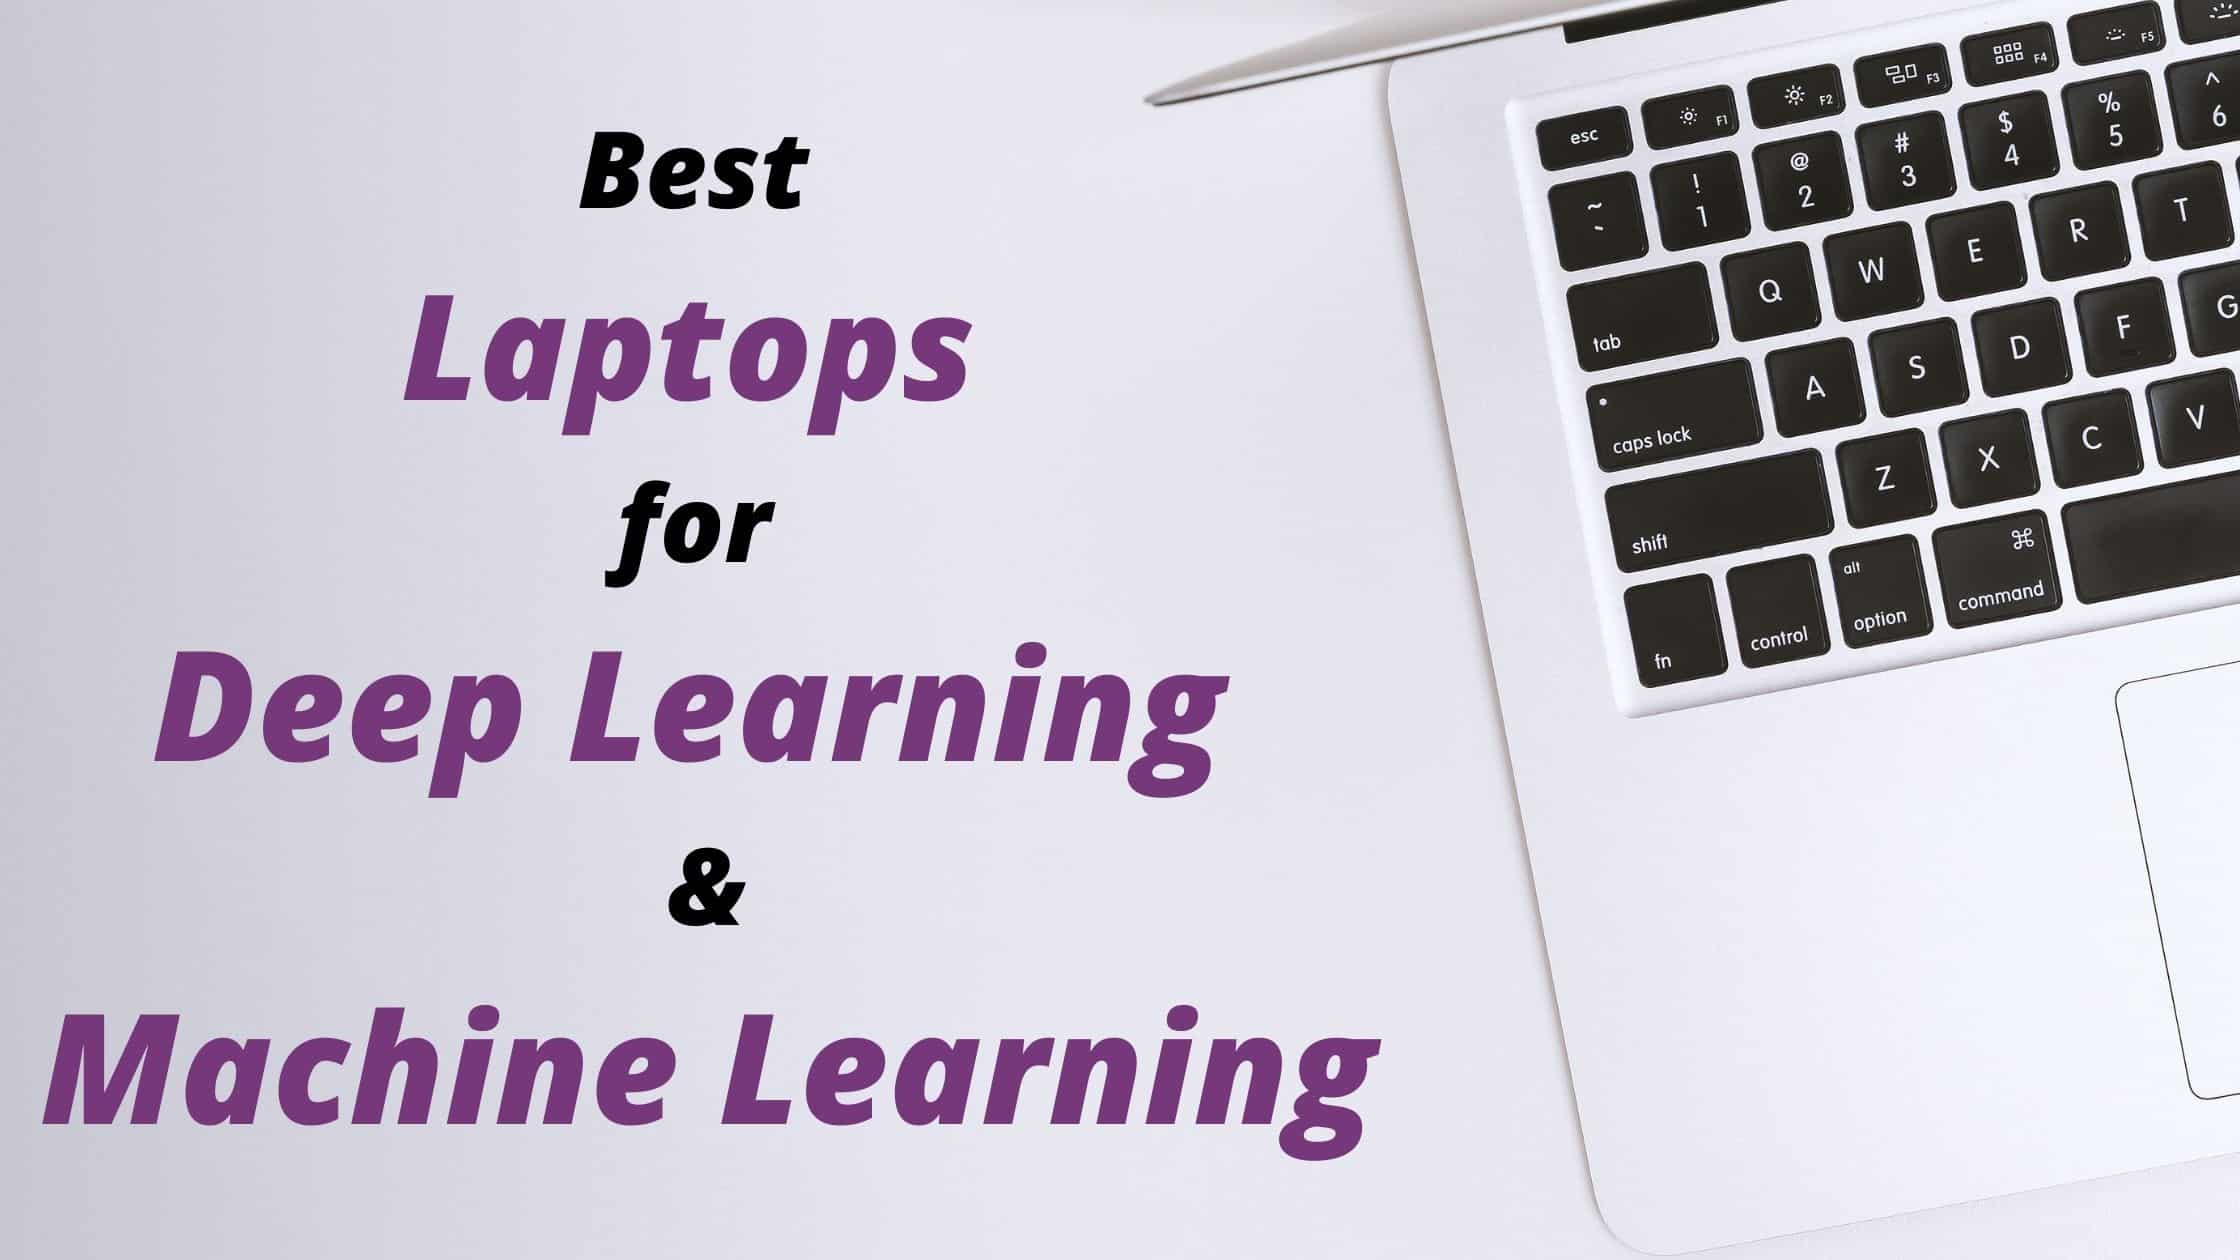 What Is The Best Laptop To Buy In 2023 For Machine Learning